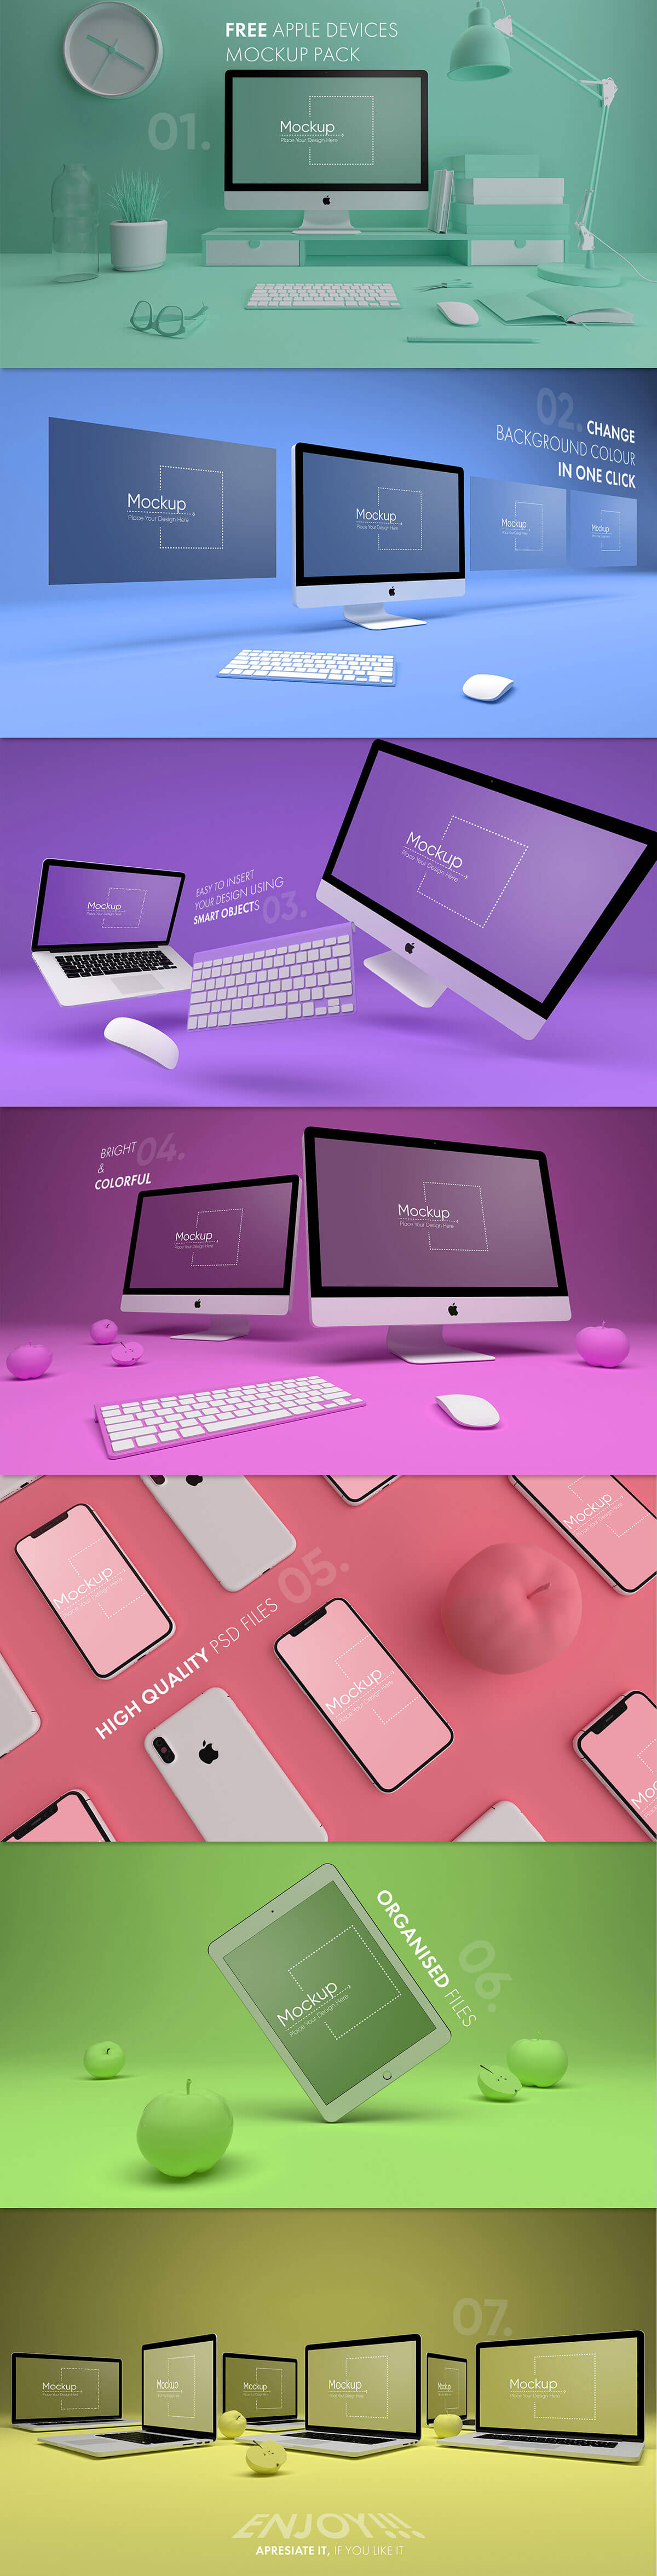 Download 7 Free Colorful Apple Devices Mockup Pack Creativetacos PSD Mockup Templates